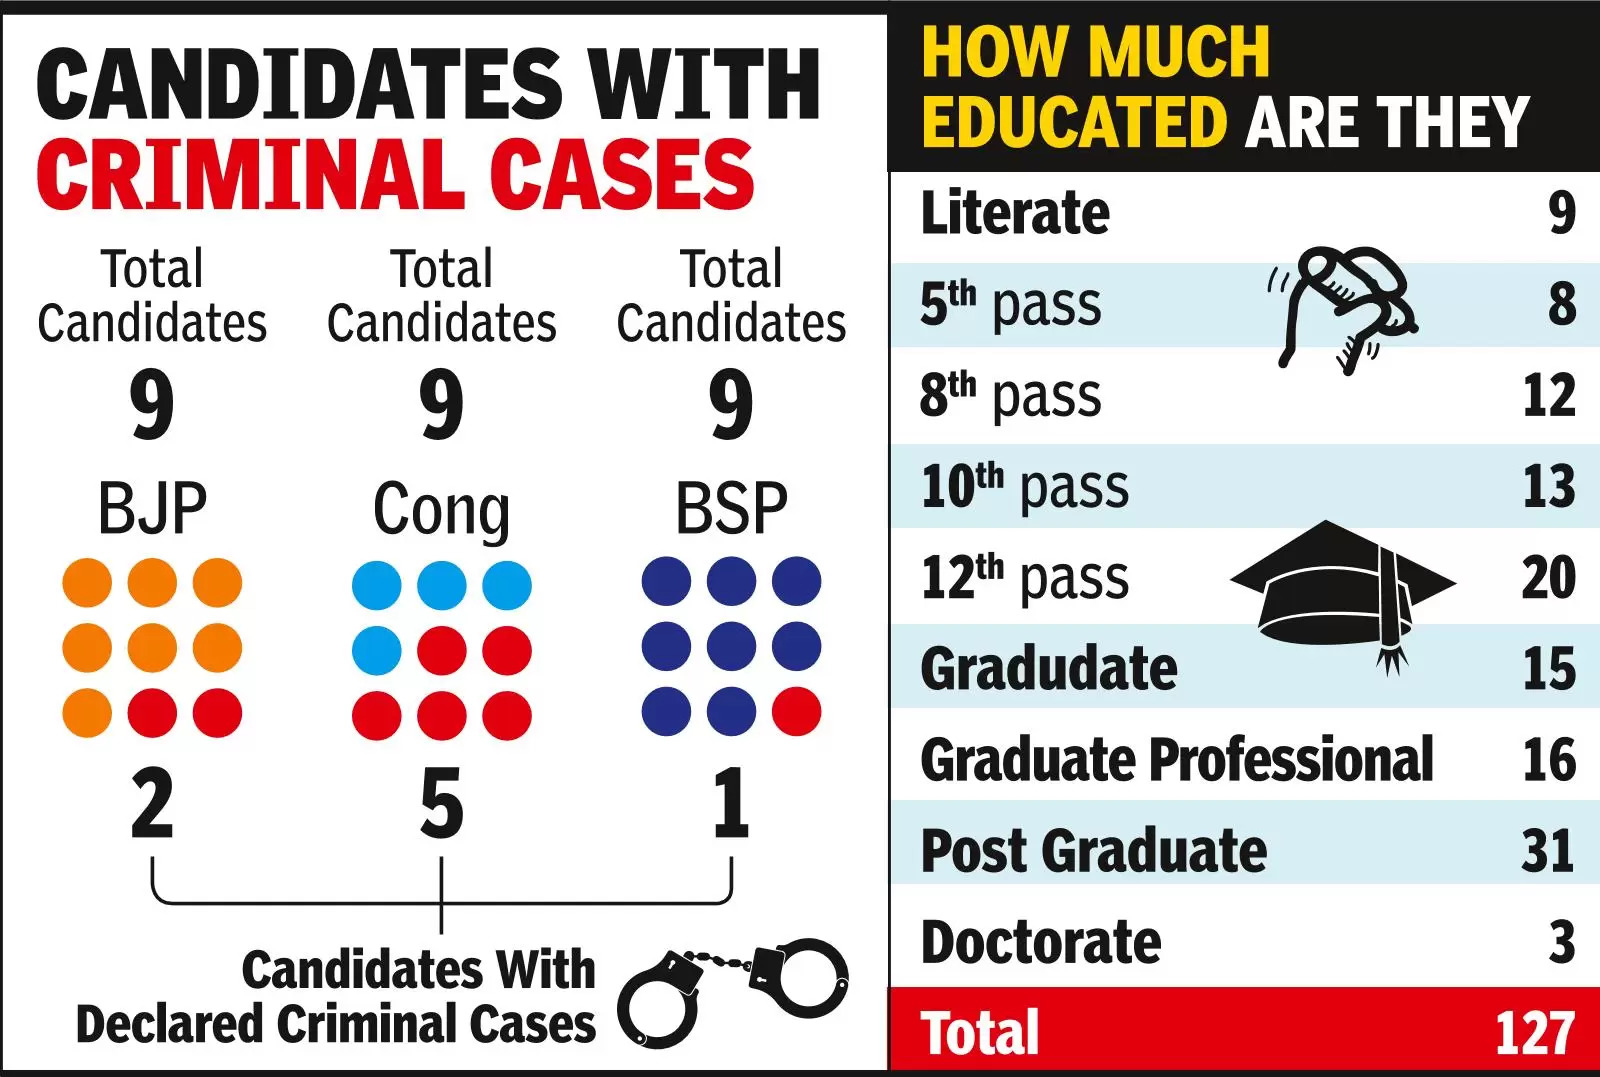 62 netas in fray are undergrads, 9 have ‘serious criminal cases’